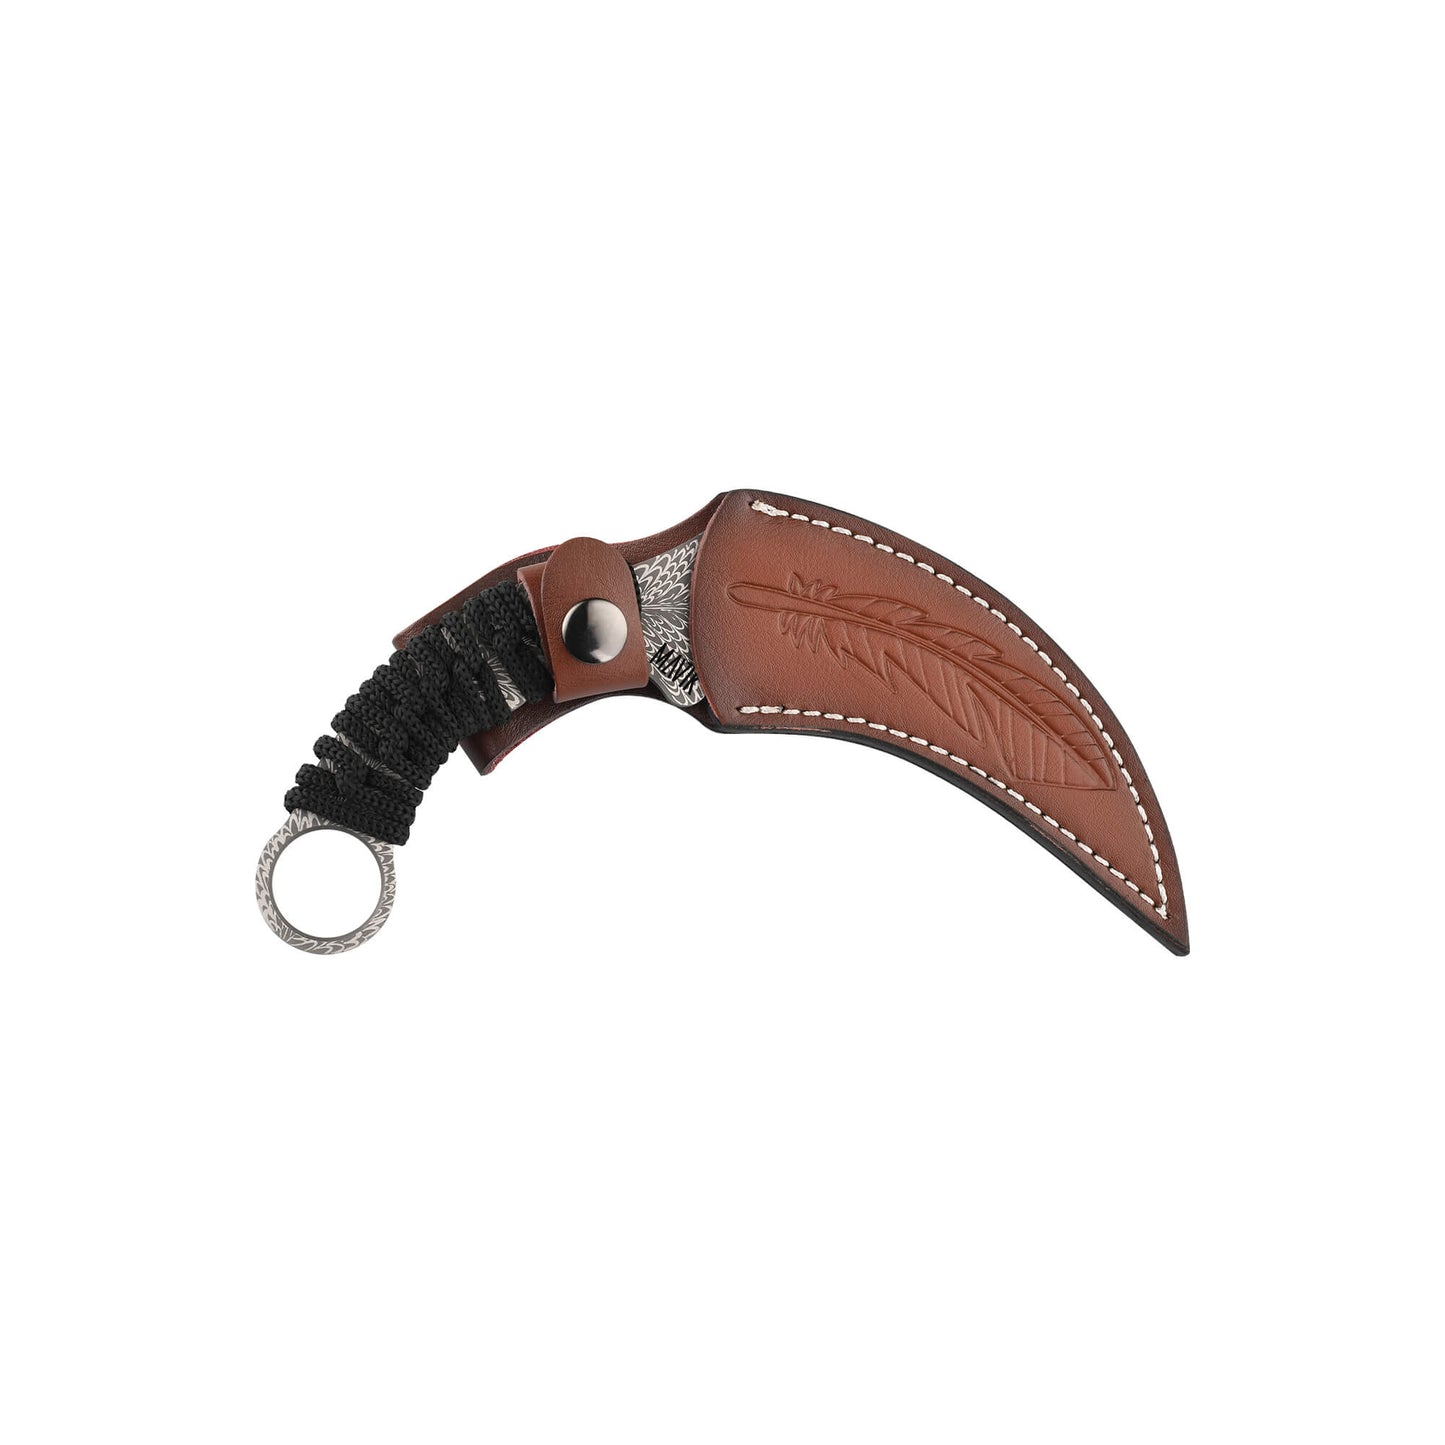 Fixed-blade knife Crius from Mavik Gear made of 420 Steel with blade length 3.77" and handle length 4.17".